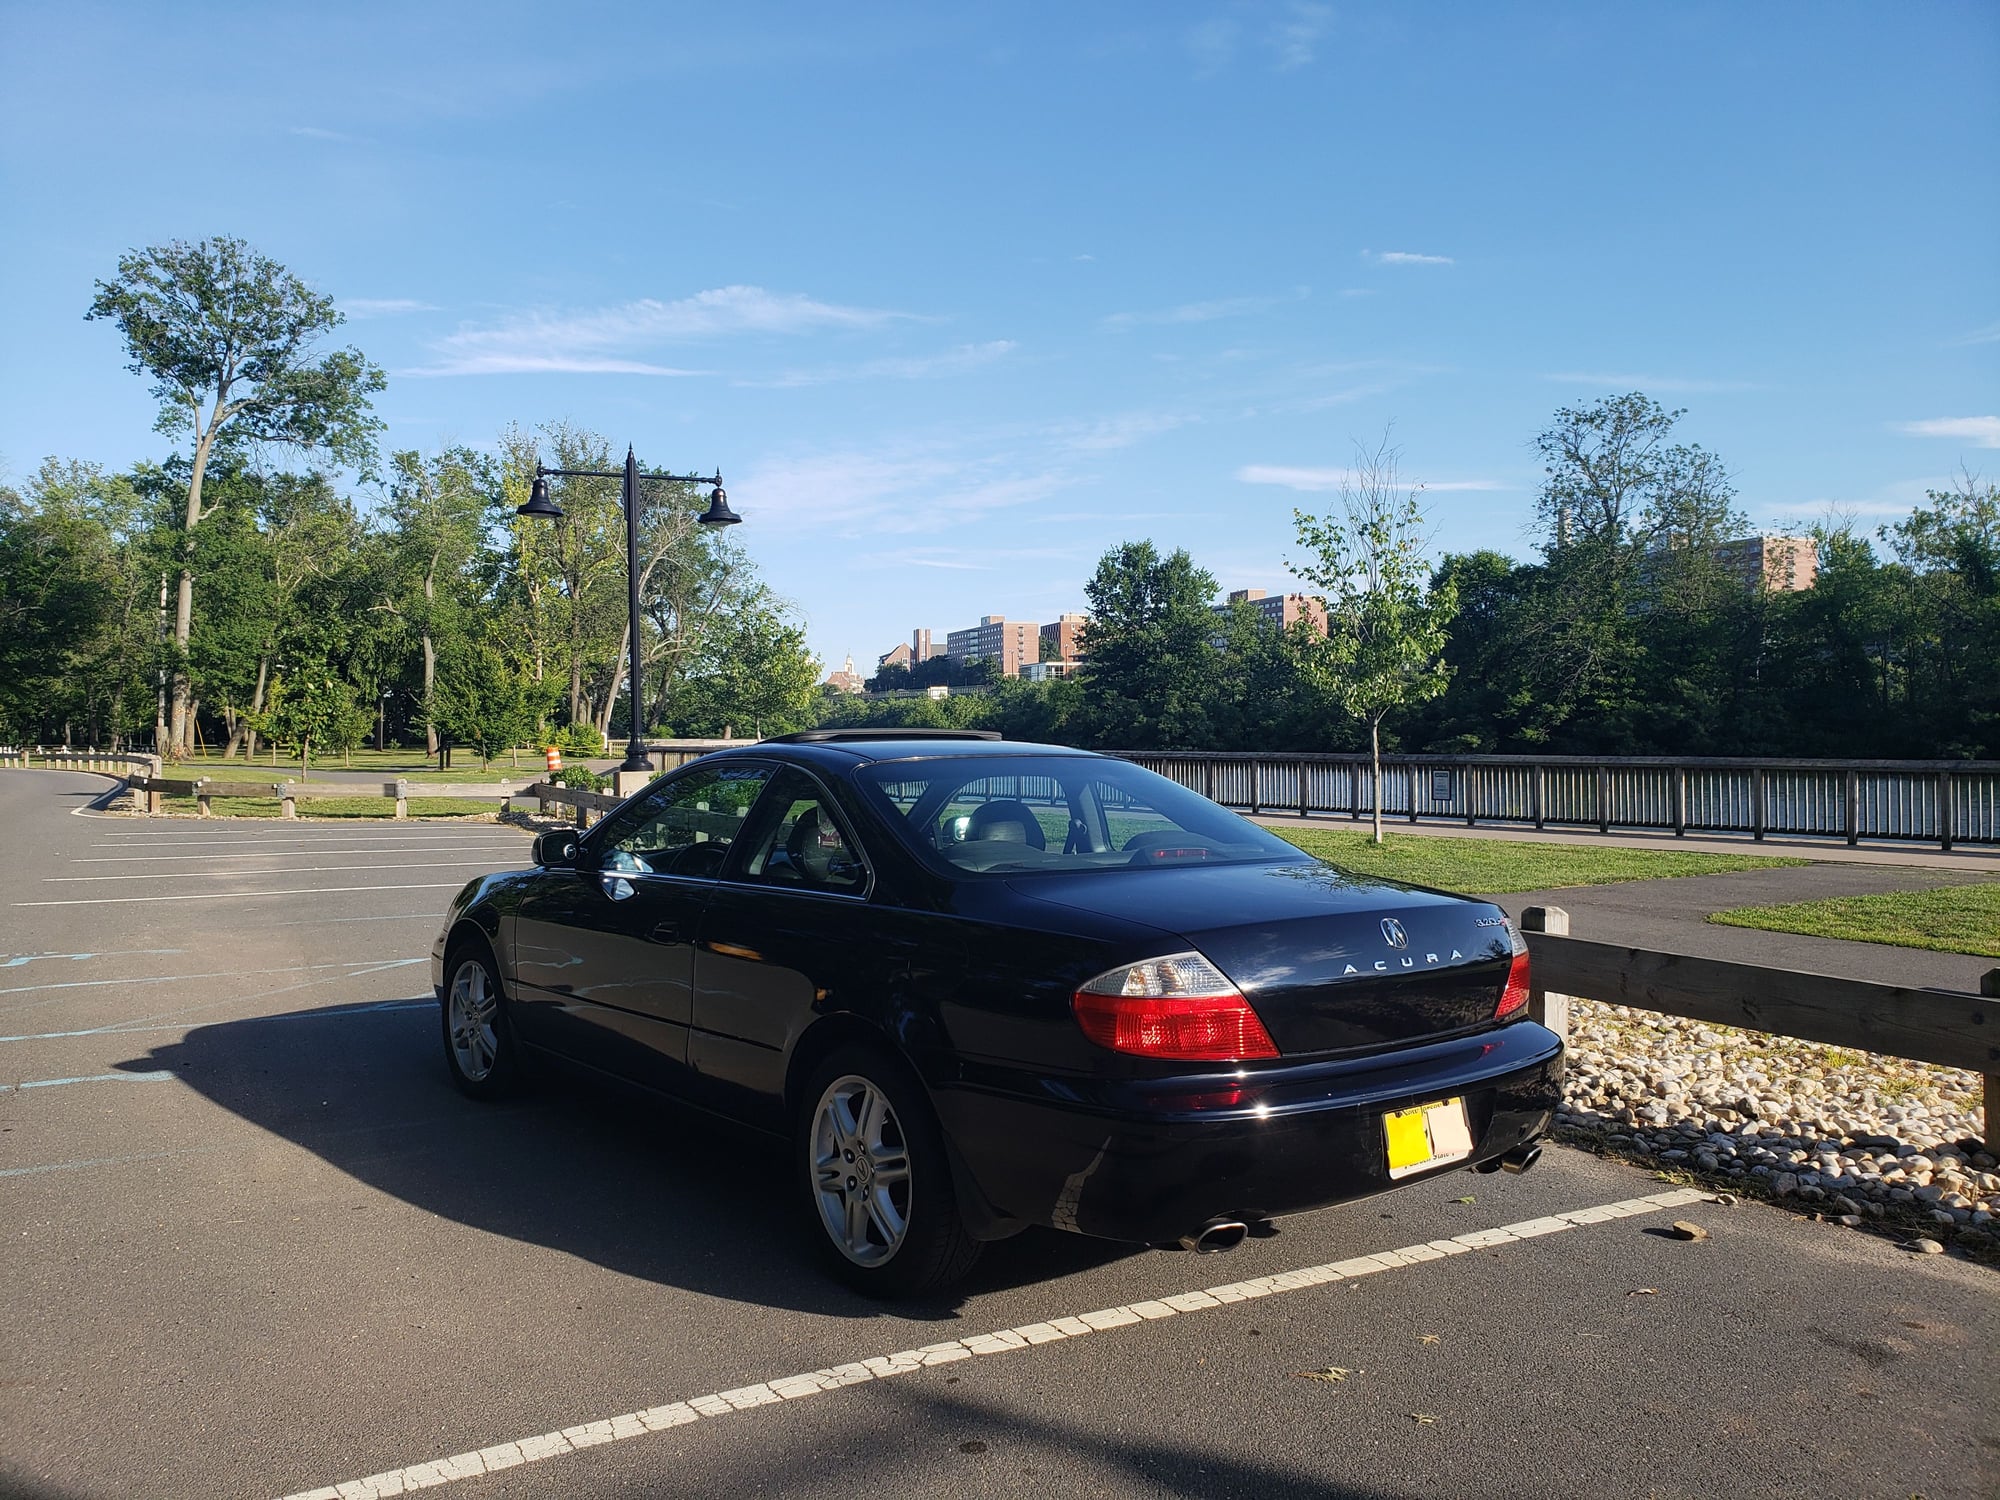 2003 Acura CL - FS: 2003 Acura CL Type-S AT-5 192k miles - Used - VIN 19uya42663a009178 - 192,000 Miles - 6 cyl - 2WD - Automatic - Coupe - Black - Highland Park, NJ 08904, United States